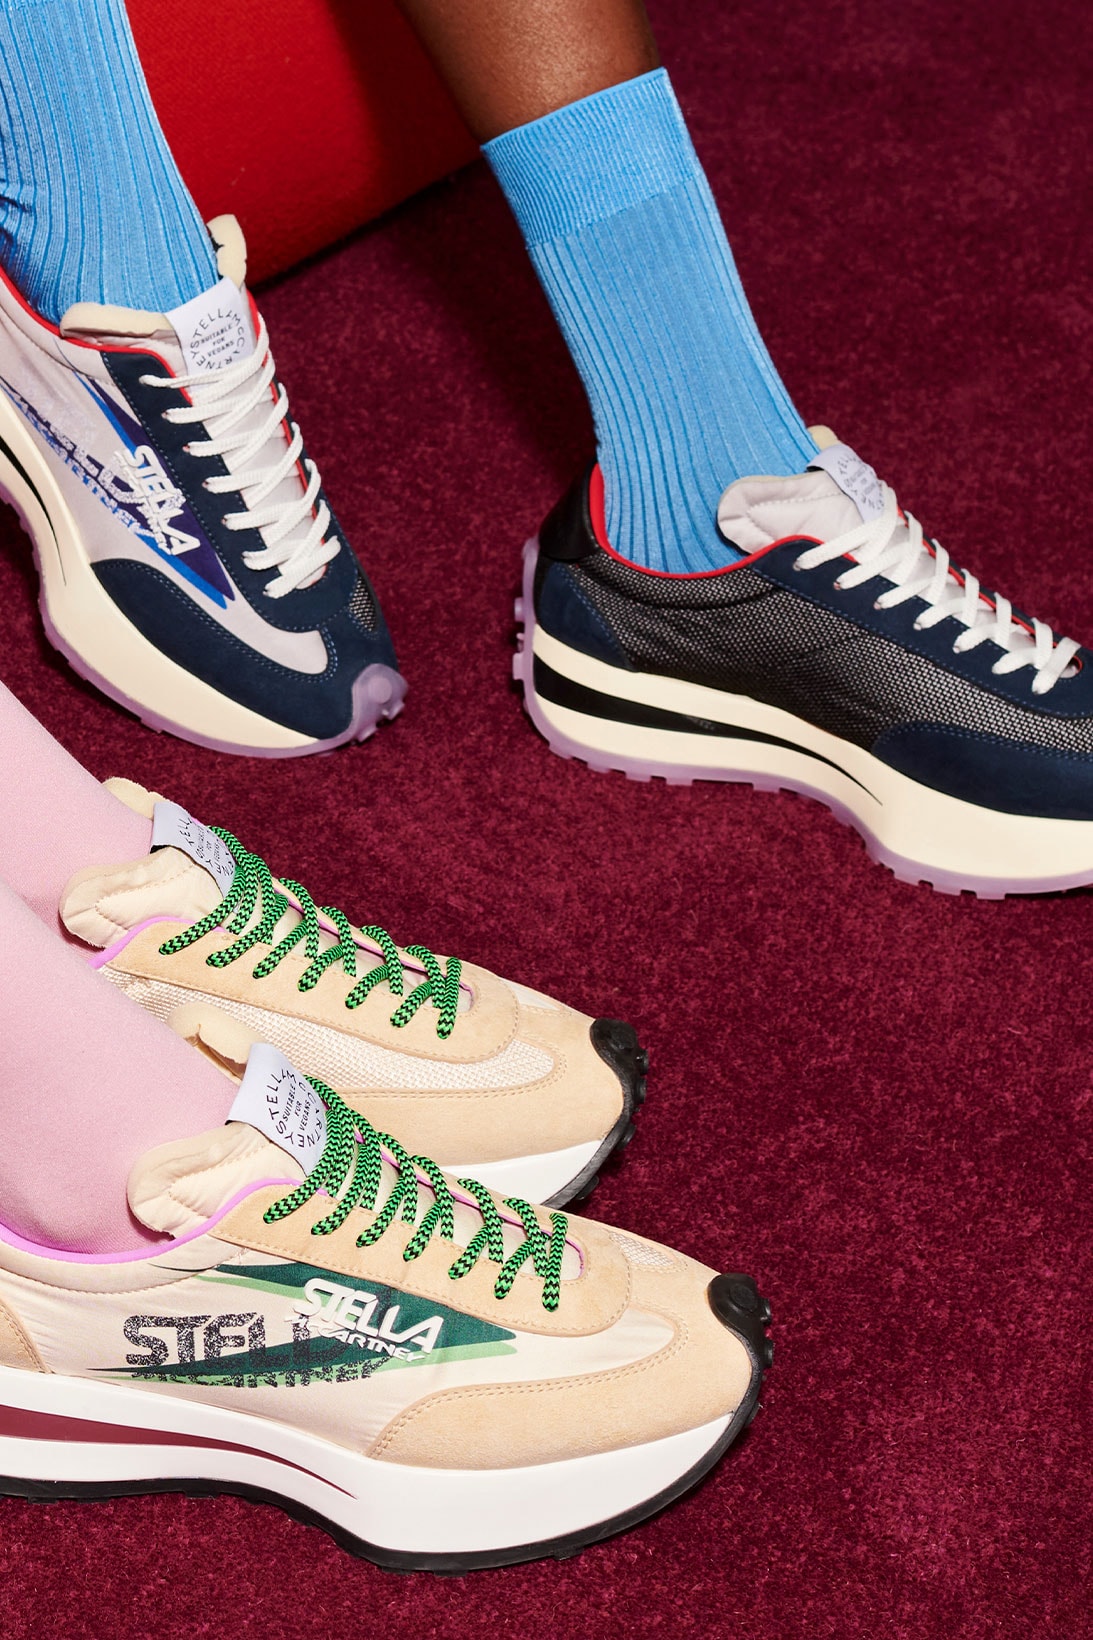 Stella McCartney Launches Plant-Based & Recycled Version of Eclypse  Sneakers - vegconomist - the vegan business magazine